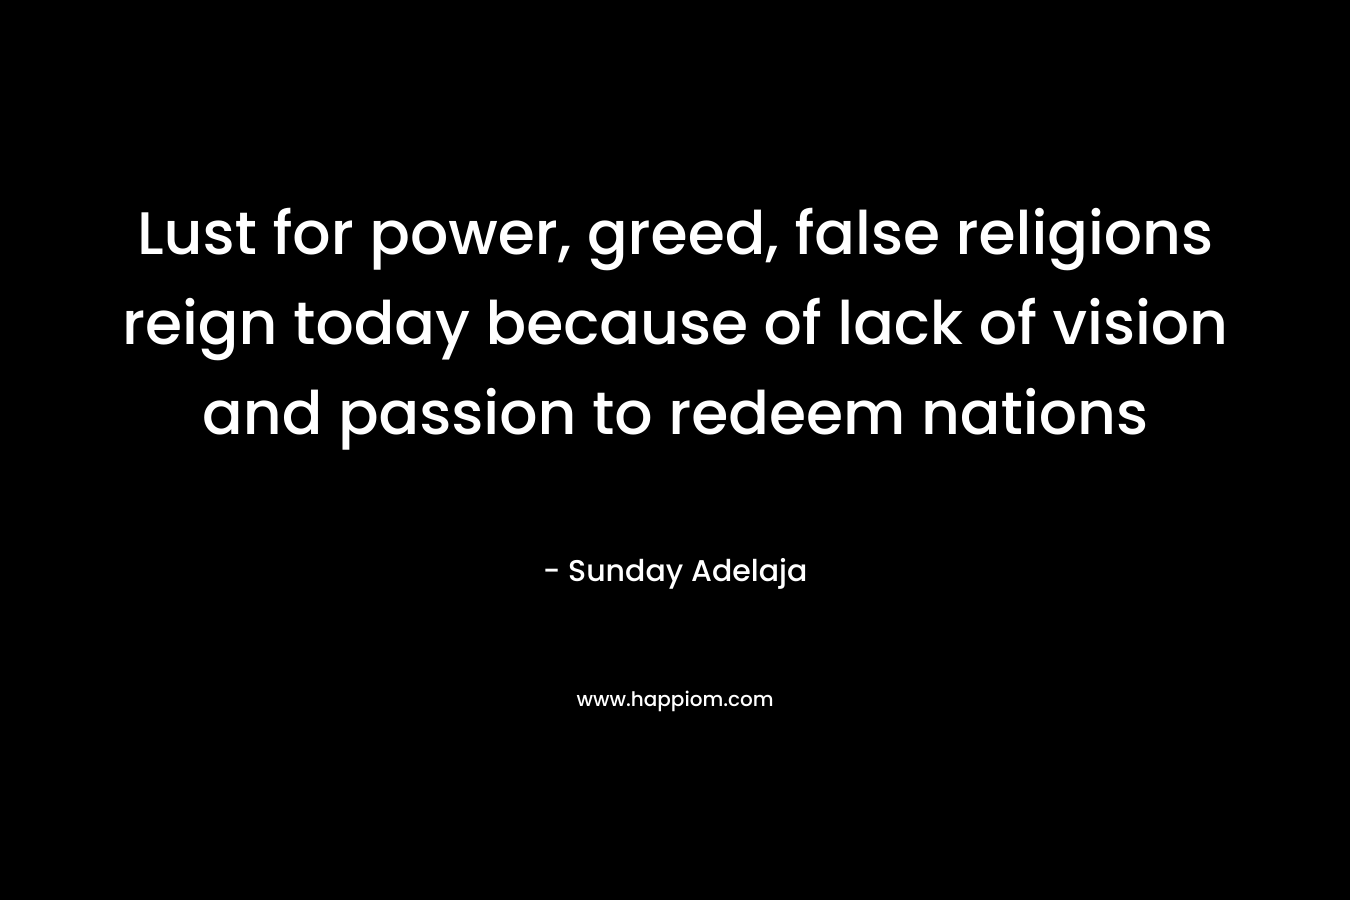 Lust for power, greed, false religions reign today because of lack of vision and passion to redeem nations